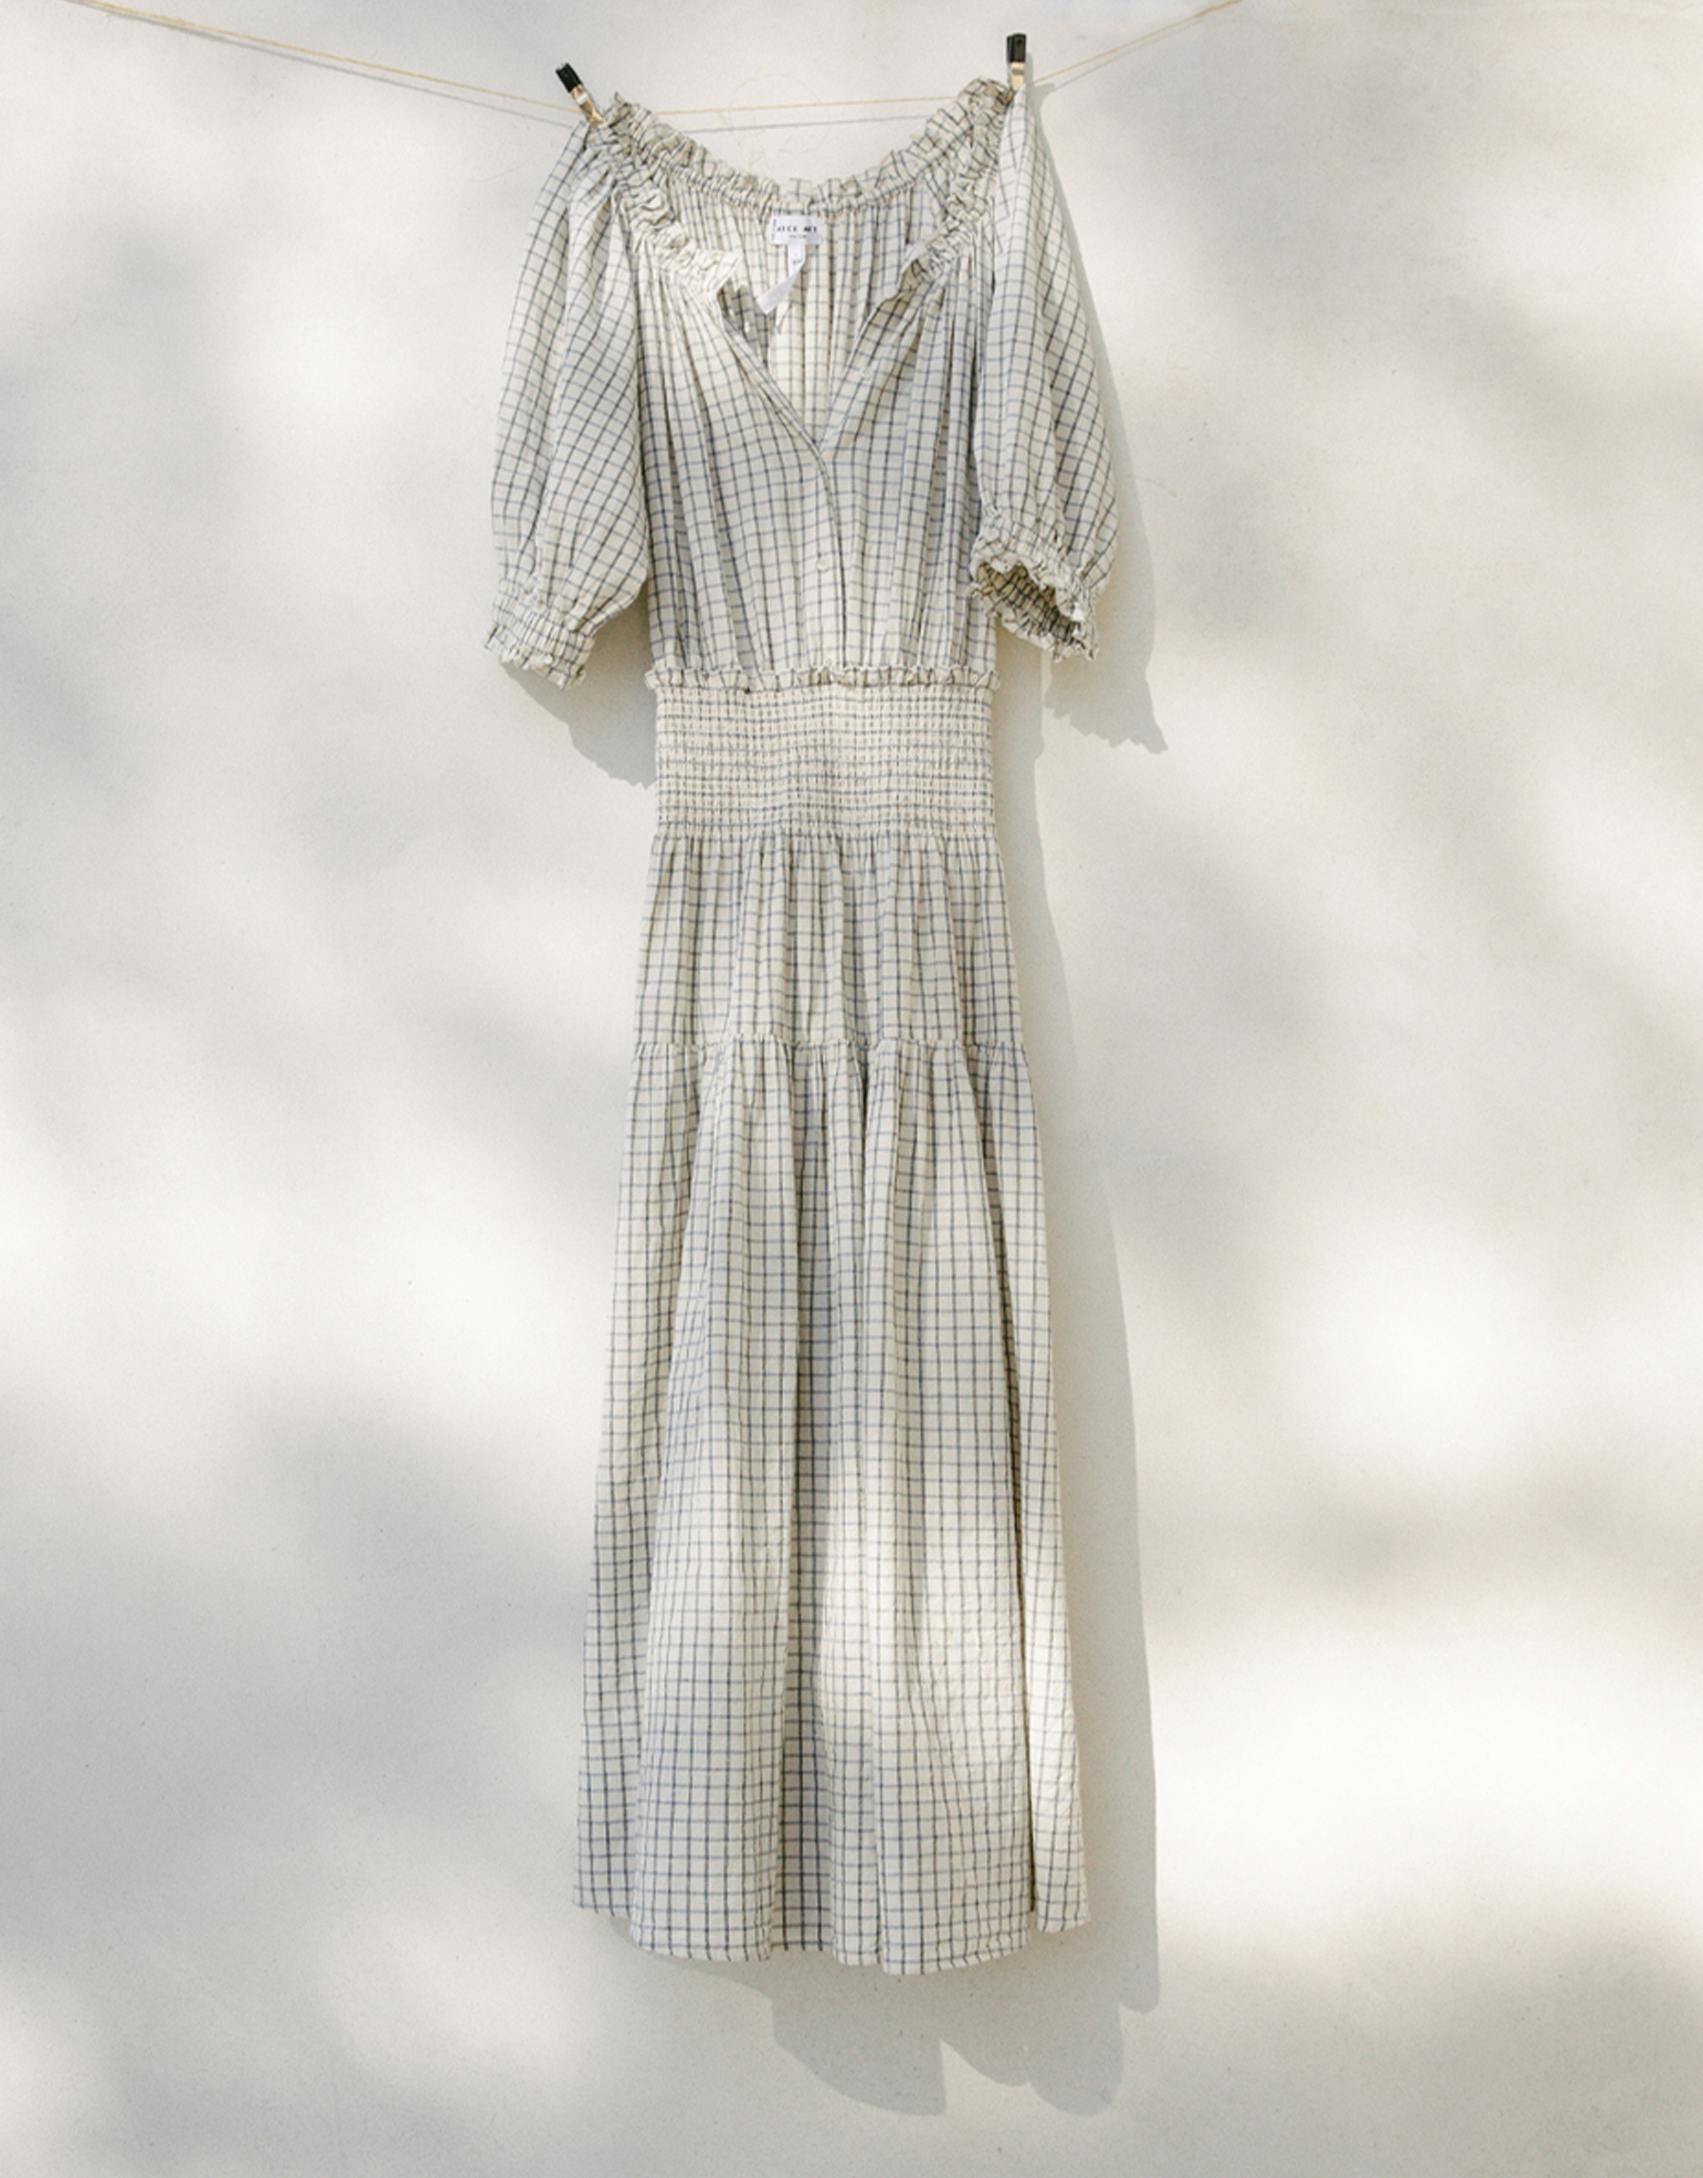 A white patterned dress hangs from a drying line